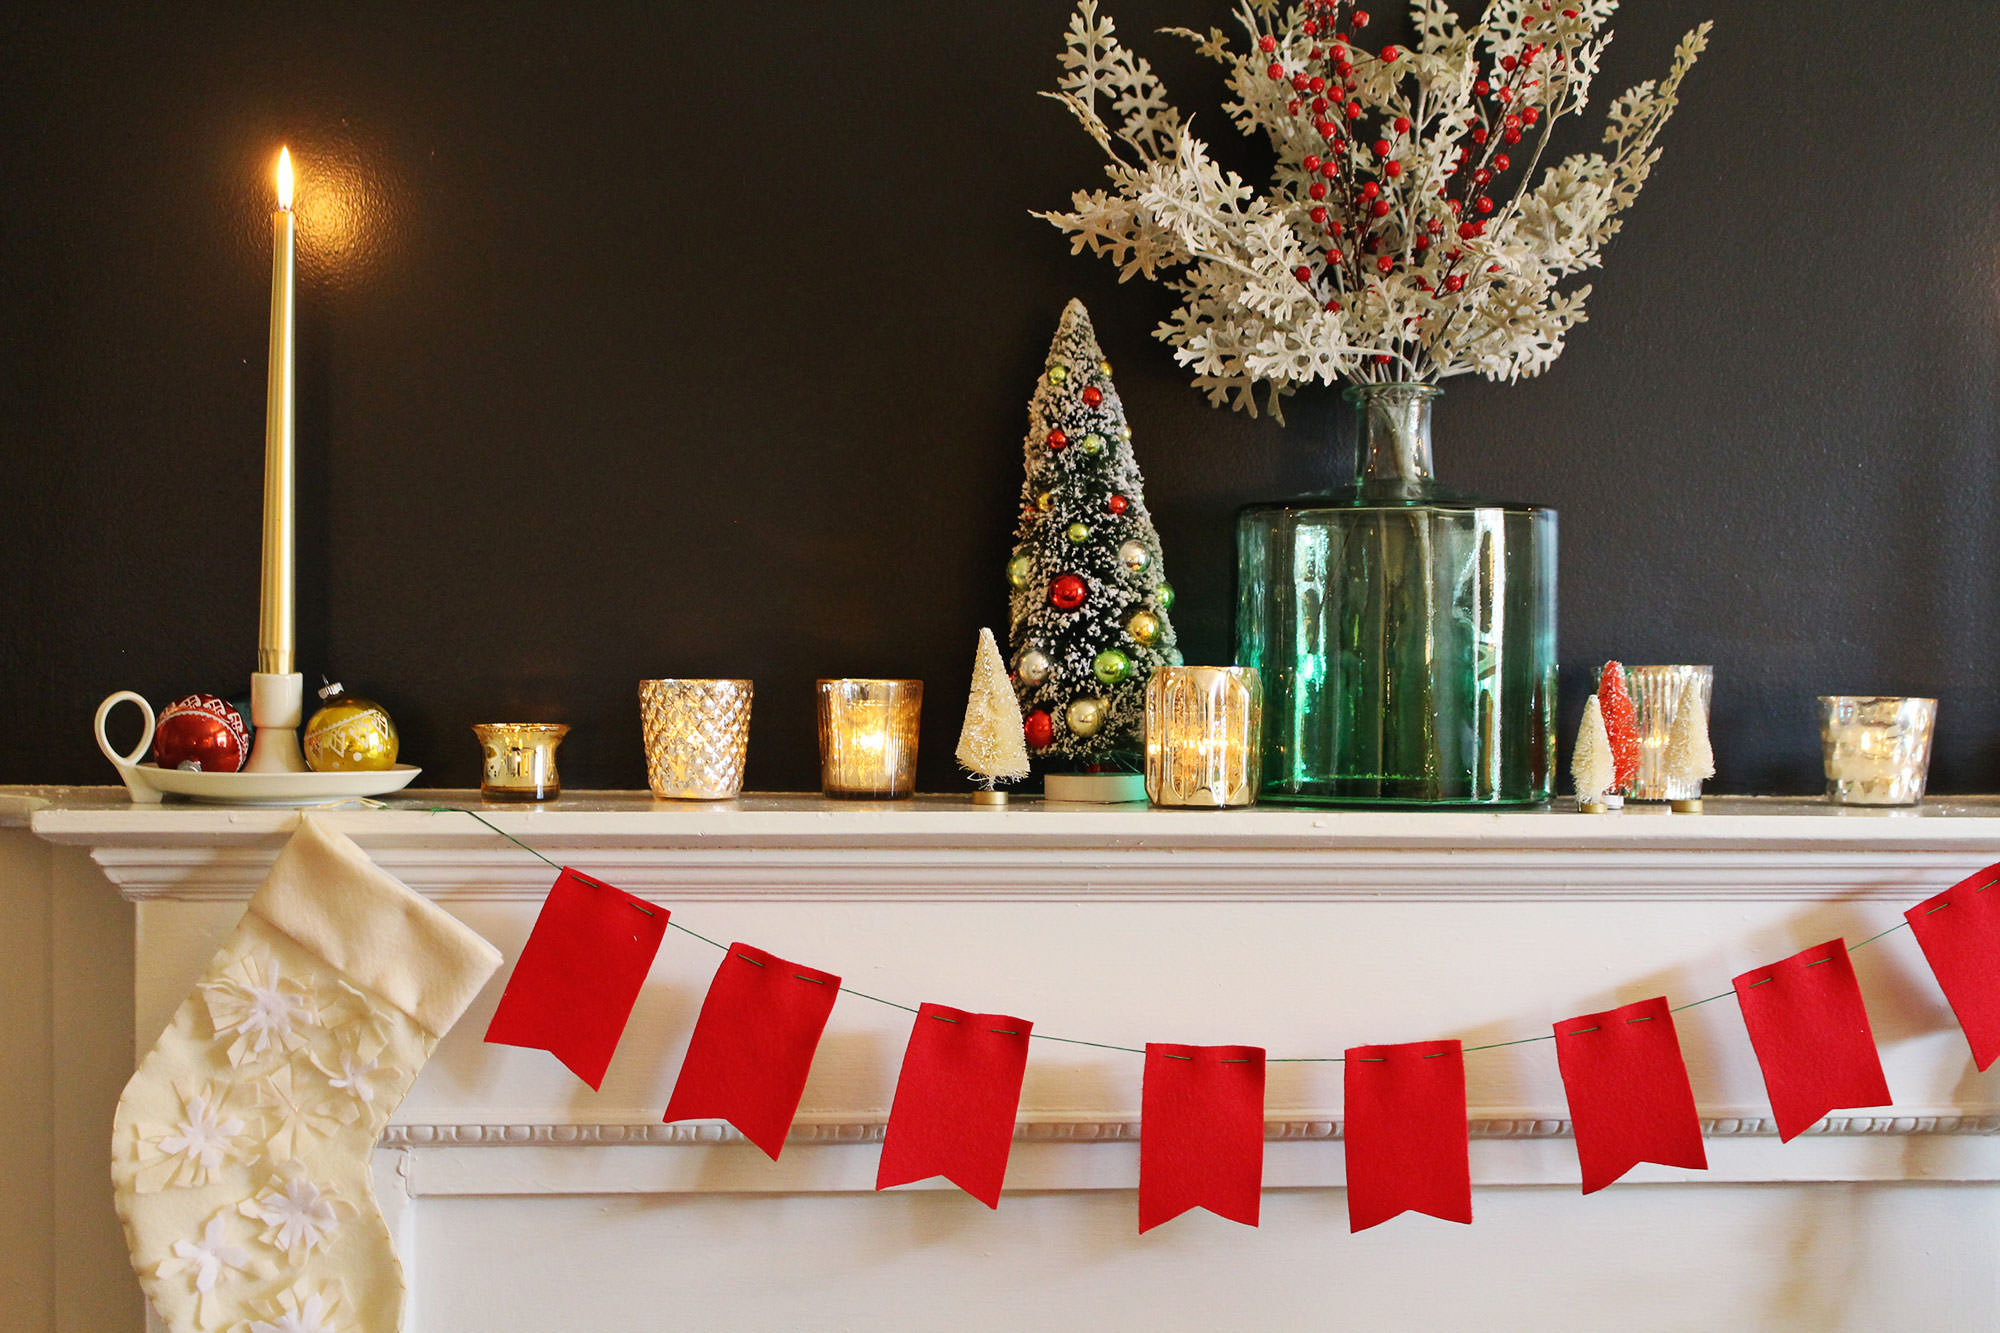 Tips for decorating your holiday mantel